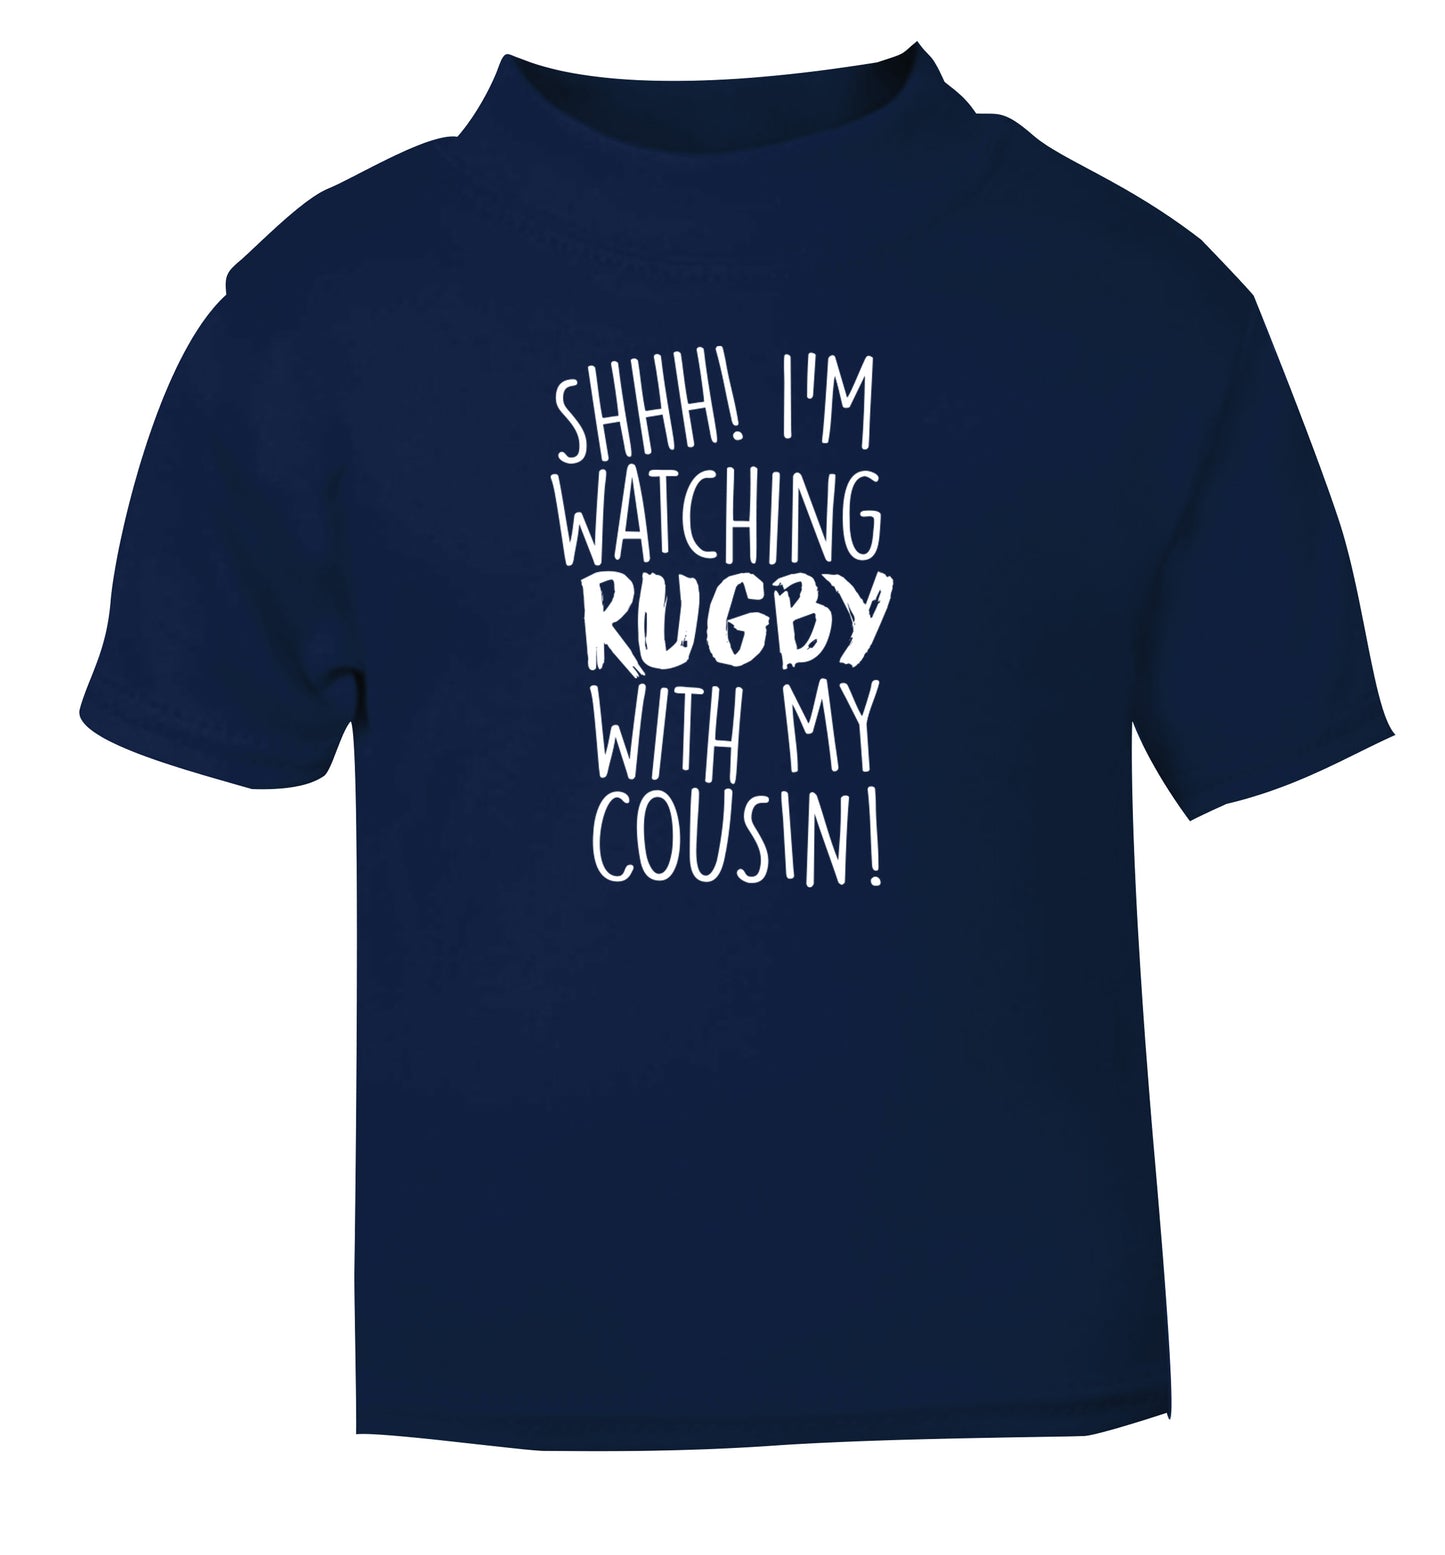 Shhh I'm watching rugby with my cousin navy Baby Toddler Tshirt 2 Years